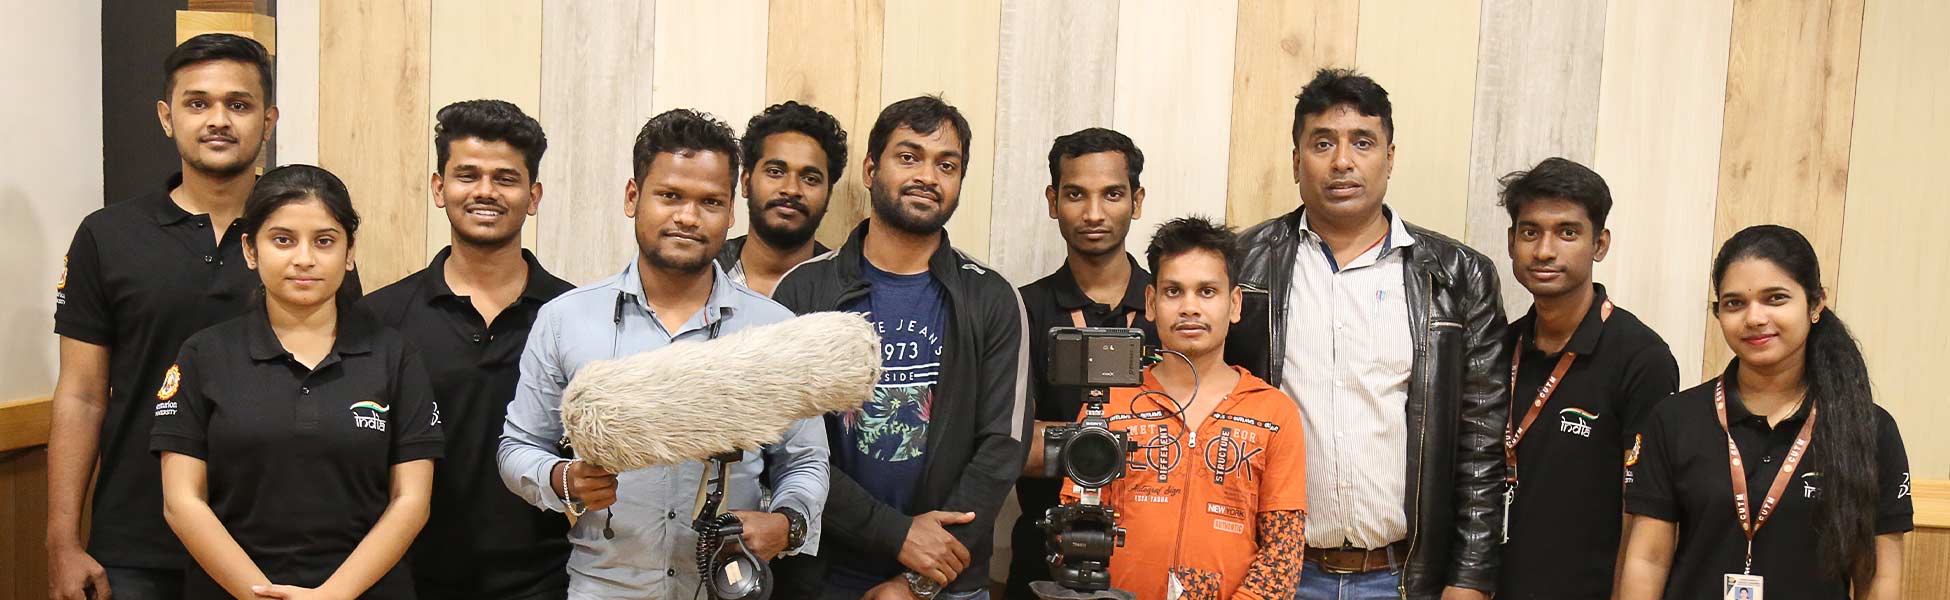 film production services in Beawar, video production services in Beawar, tv production services in Beawar, production services in Beawar